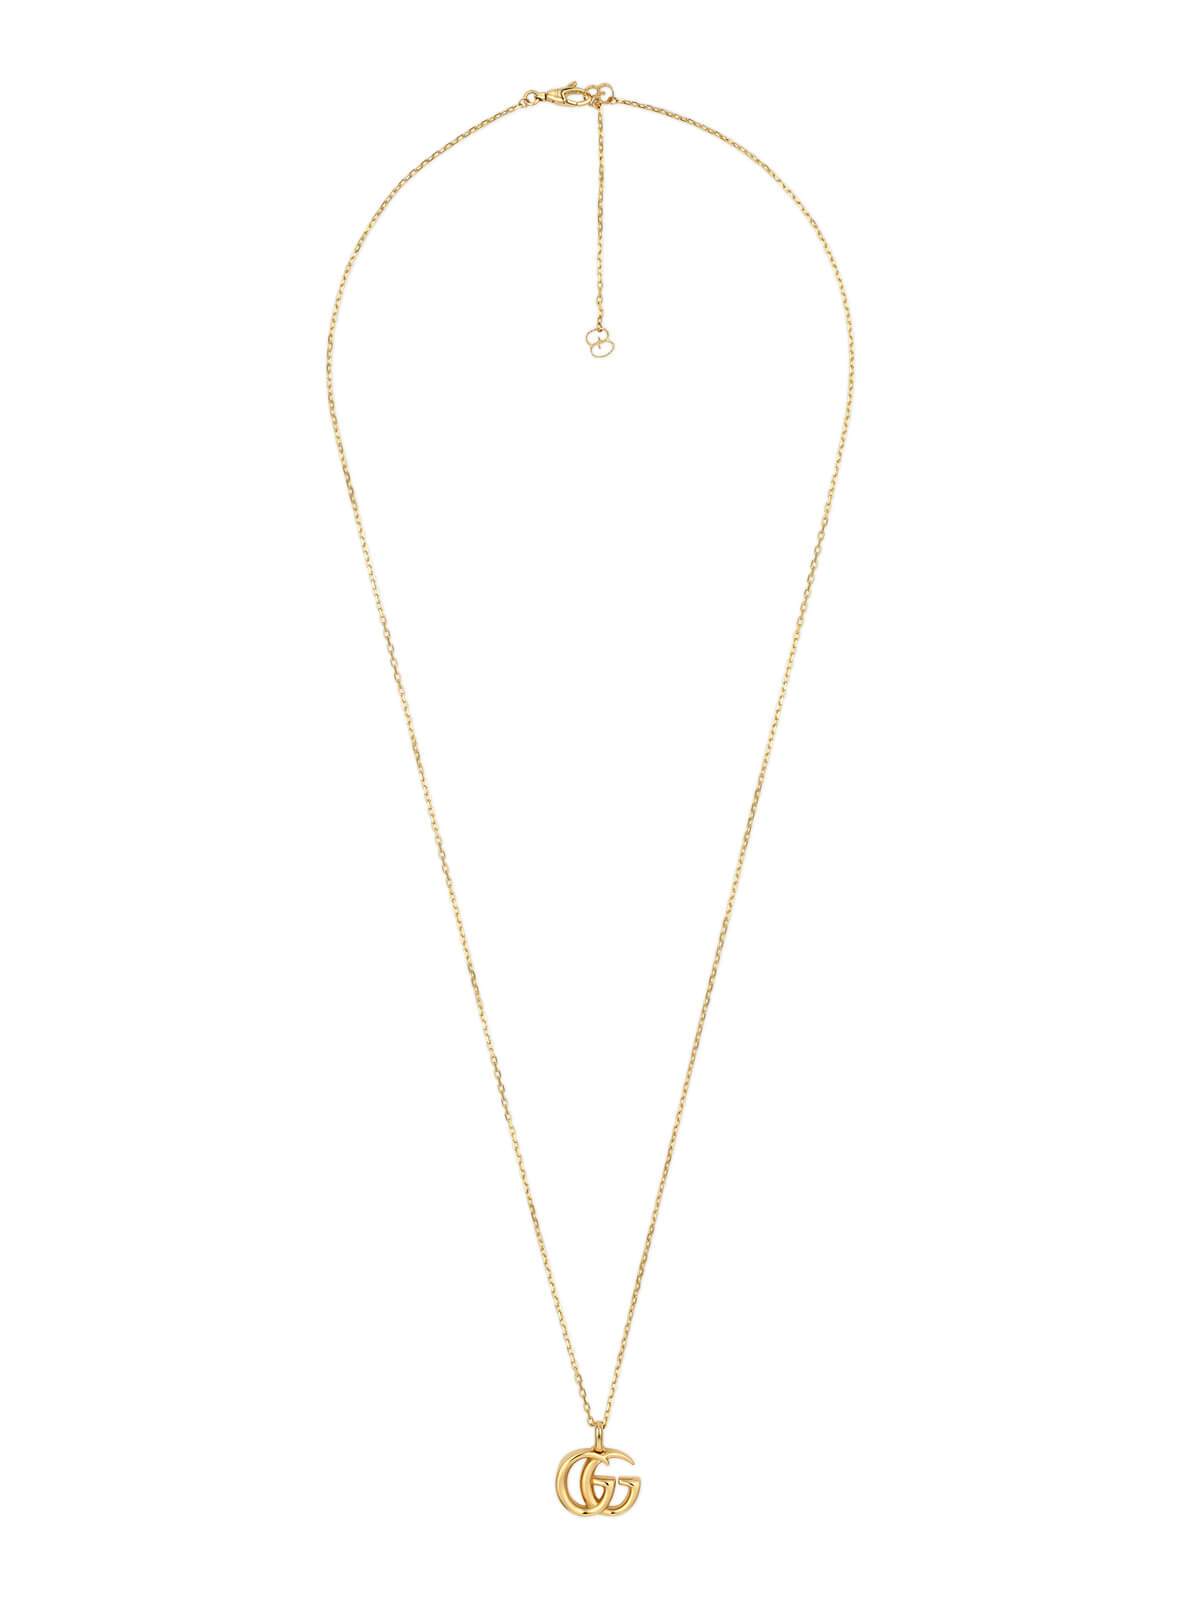 Gucci GG Running Necklace in 18ct Yellow Gold YBB50208800100U